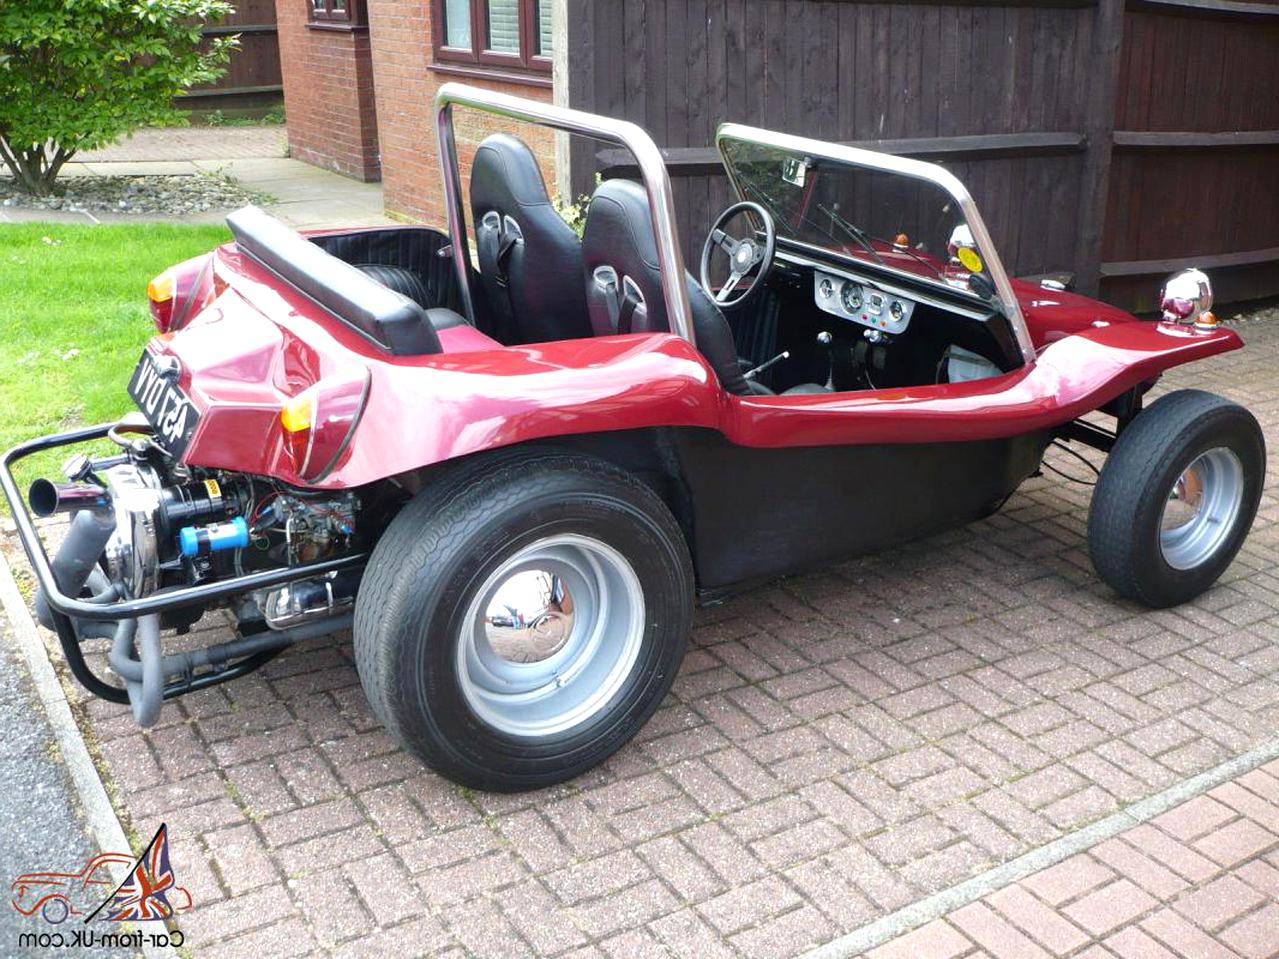 vw beach buggy for sale uk